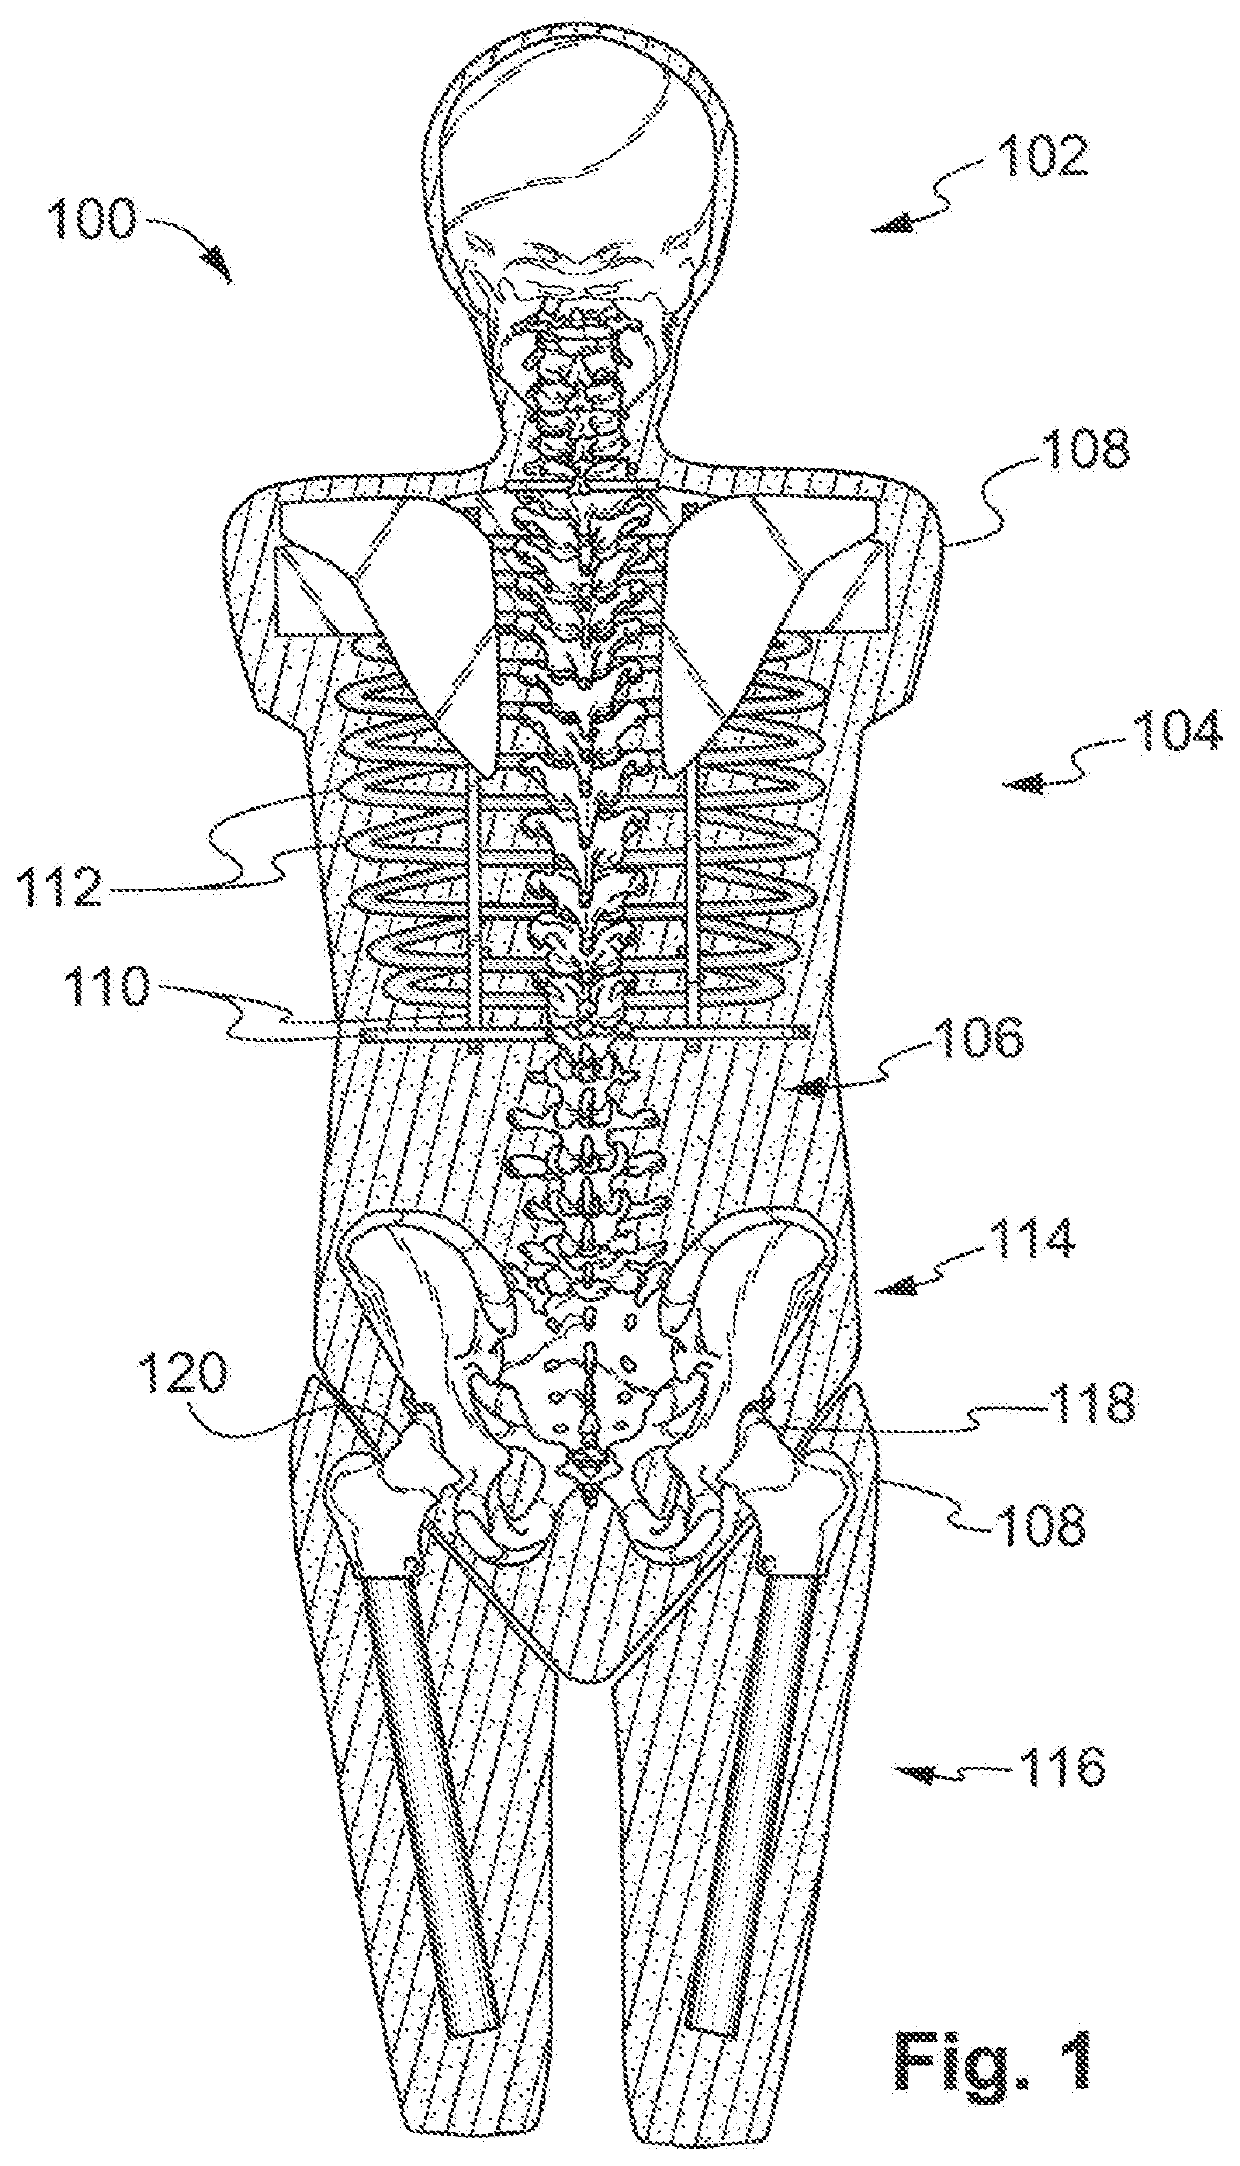 Anatomic chiropractic training mannequin with network of pressure sensors